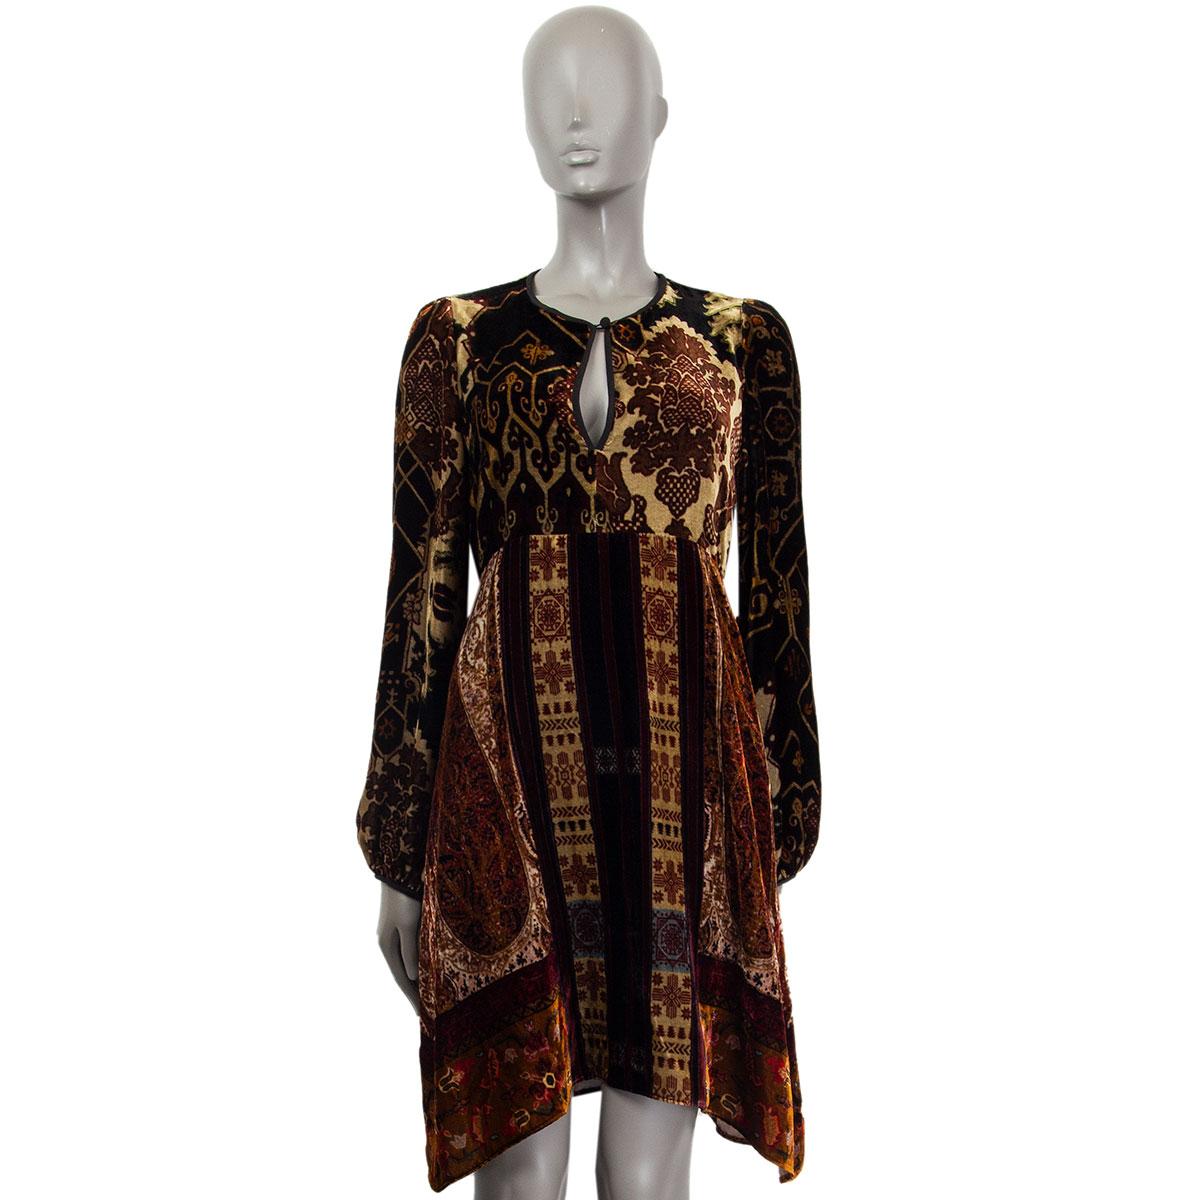 authentic Etro Nottinghamshire empire-waist crushed velvet dress in black, sage, toffee, burgundy and gold-brown viscose (82%) silk (18%) with a flared A-line, one-button at the neckline and bishop sleeves. Lined in black silk. Closes with a